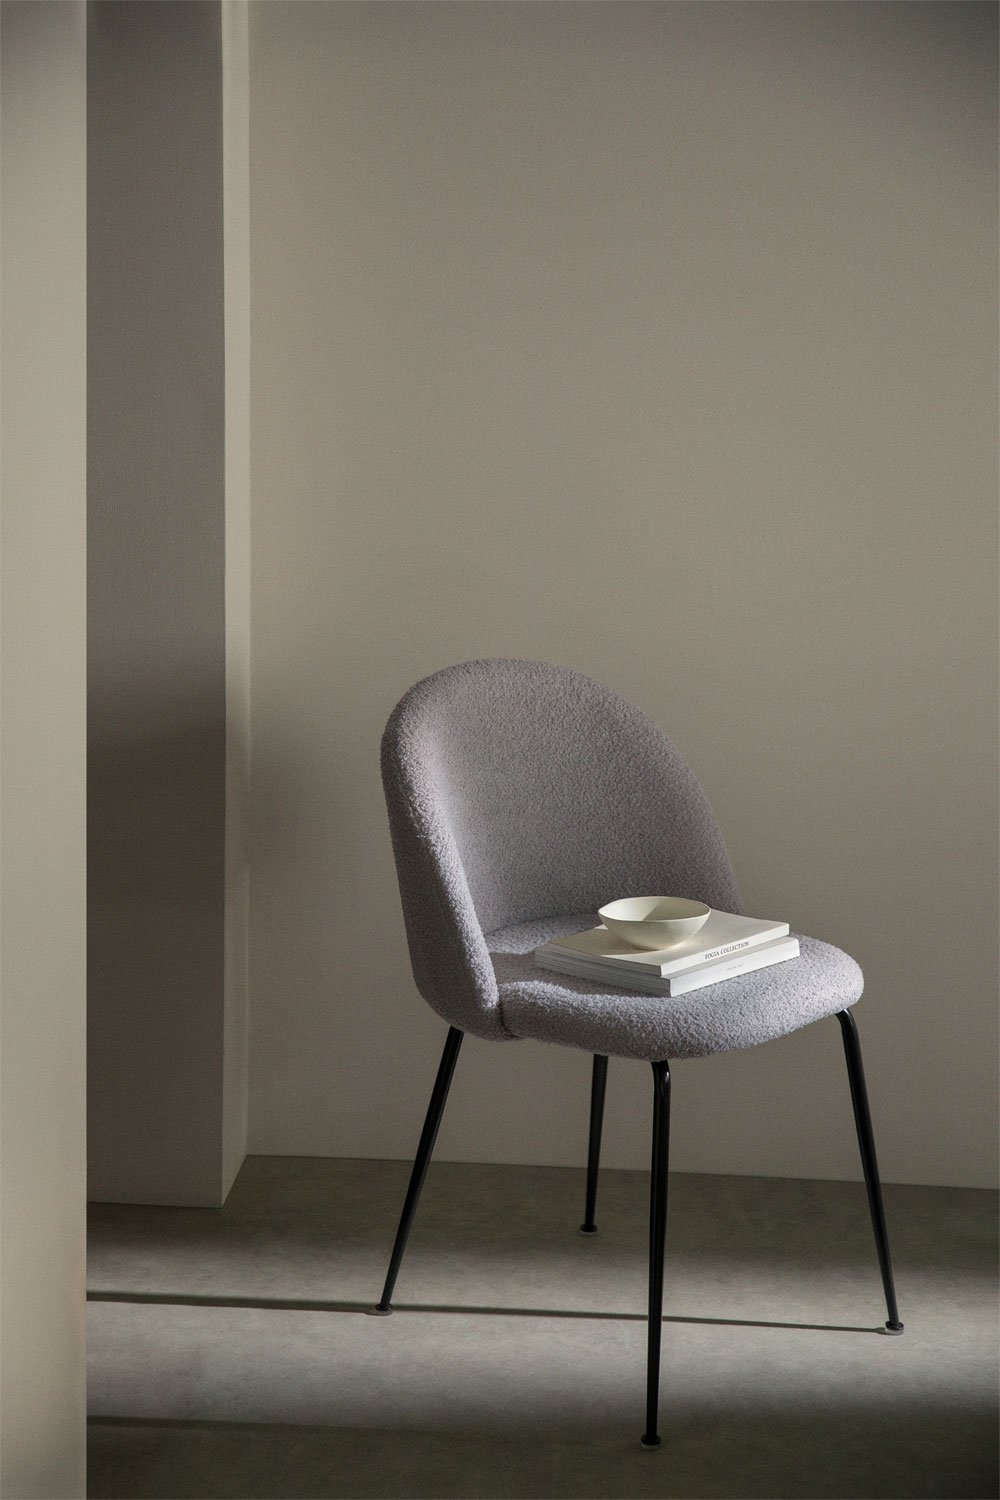 Chenille Dining Chair Kana Design, gallery image 1